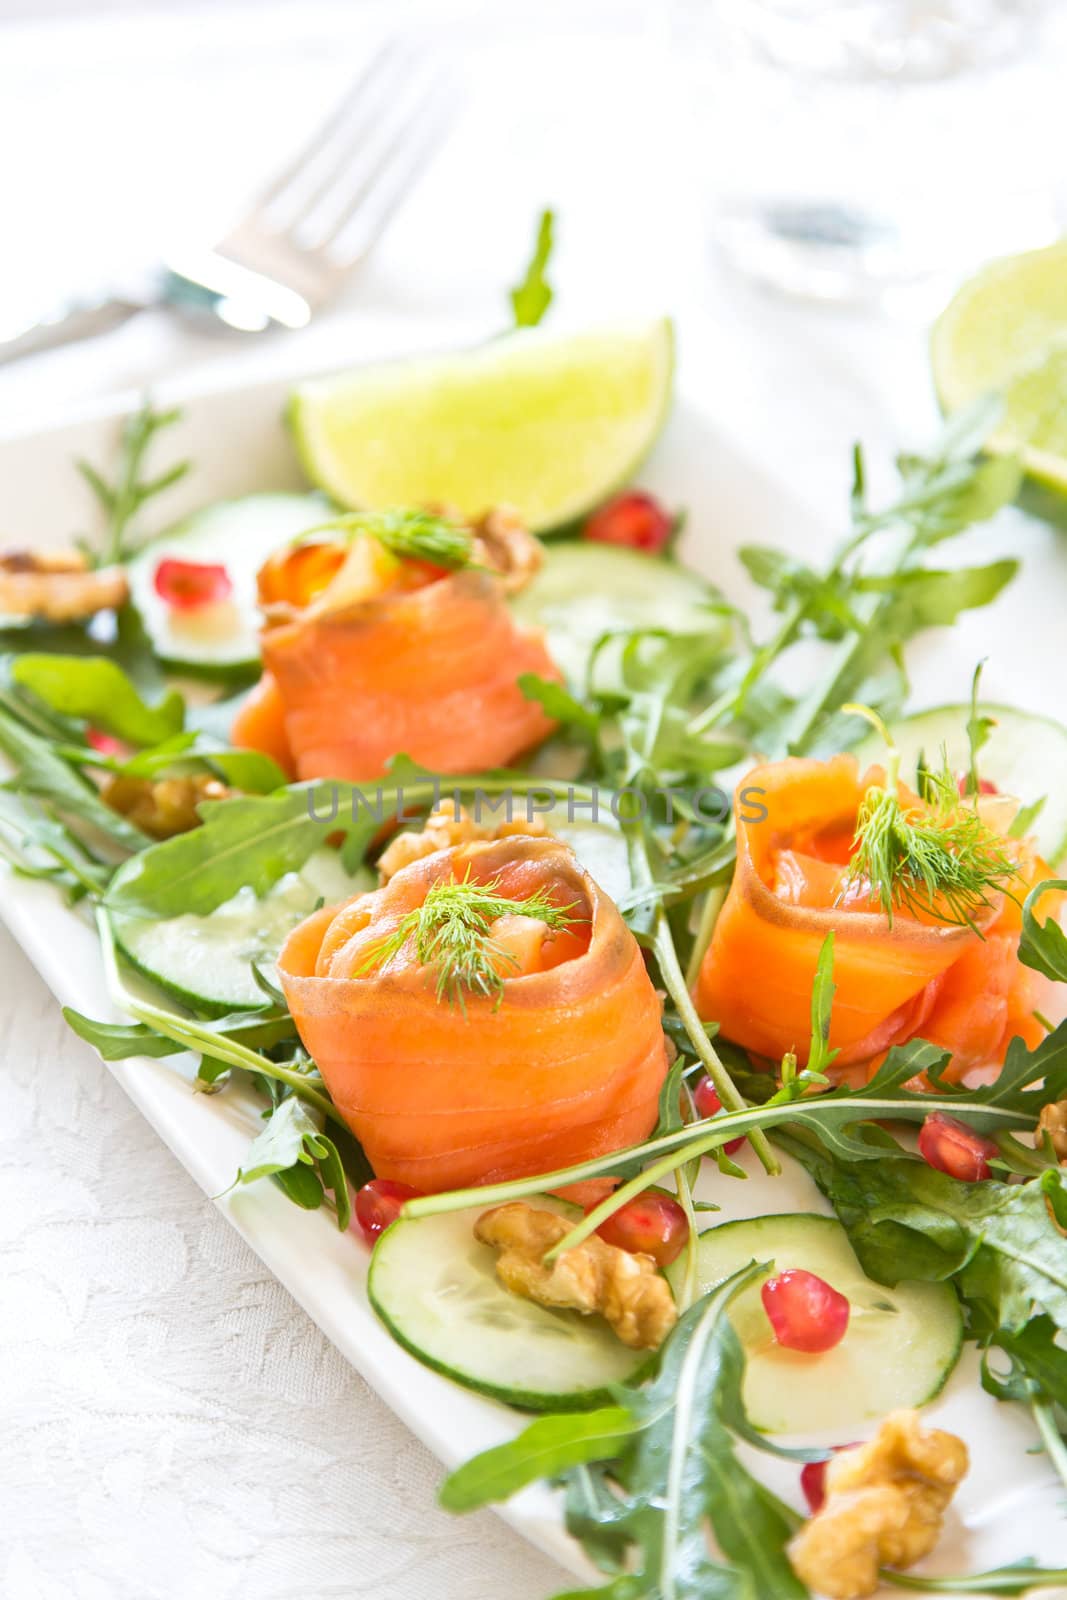 Smoked salmon with pomegranate and walnut salad by vanillaechoes